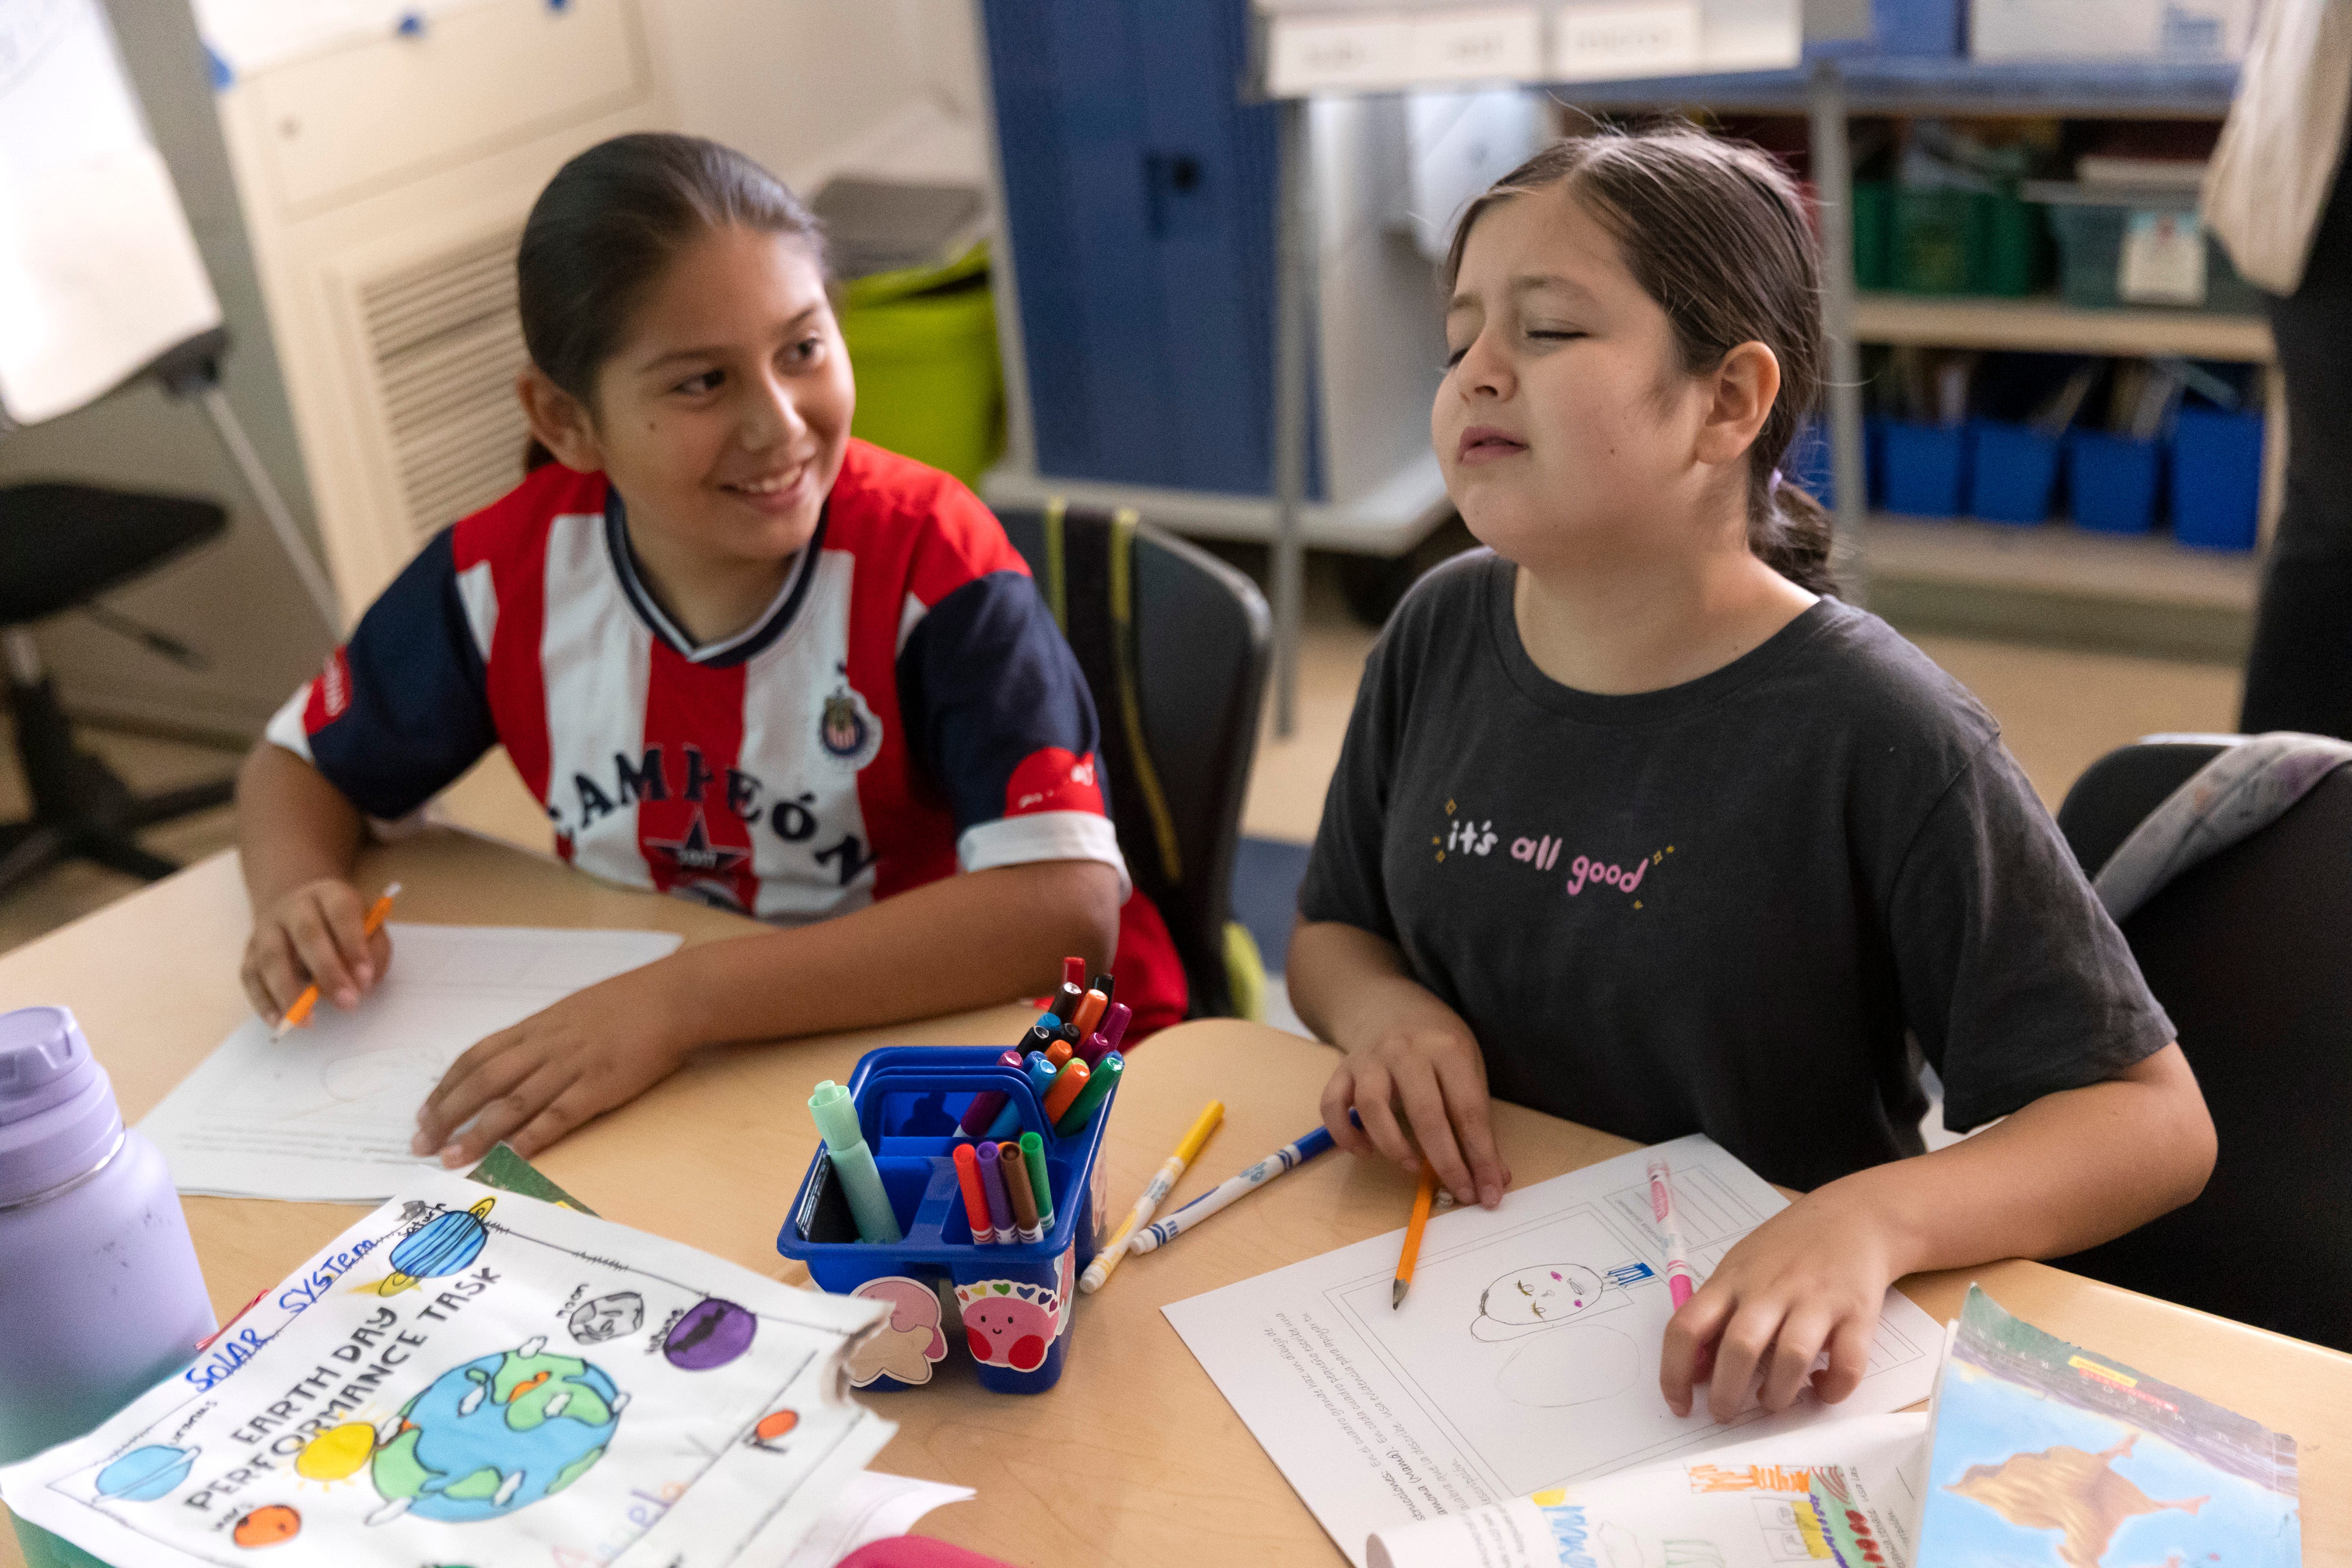 Valeria Escobedo Martinez (right) and Erick Ucelo Bustos, fourth grade students in Wendy Gonzalez's class, work on a project at Downer Elementary, San Pablo, Calif.